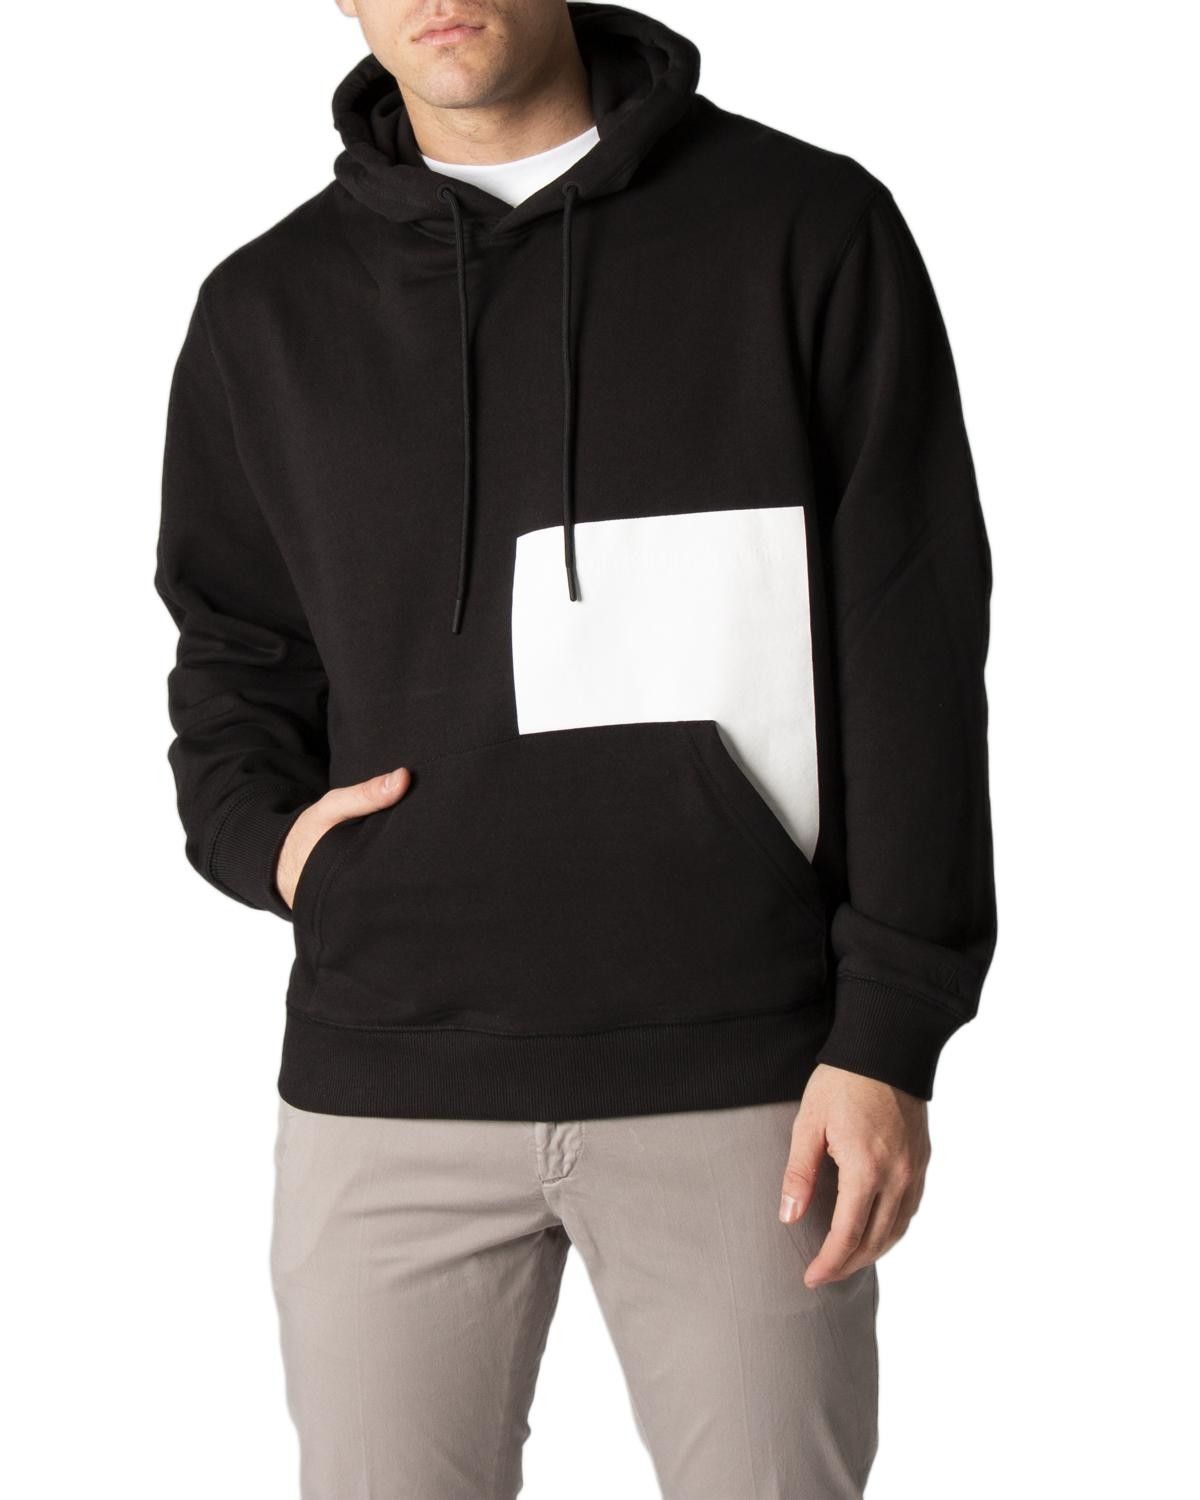 Brand: Calvin Klein Jeans
Gender: Men
Type: Sweatshirts
Season: Spring/Summer

PRODUCT DETAIL
• Color: black
• Pattern: plain
• Fastening: slip on
• Sleeves: long
• Collar: hood
• Pockets: front pockets

COMPOSITION AND MATERIAL
• Composition: -100% cotton 
•  Washing: machine wash at 30°